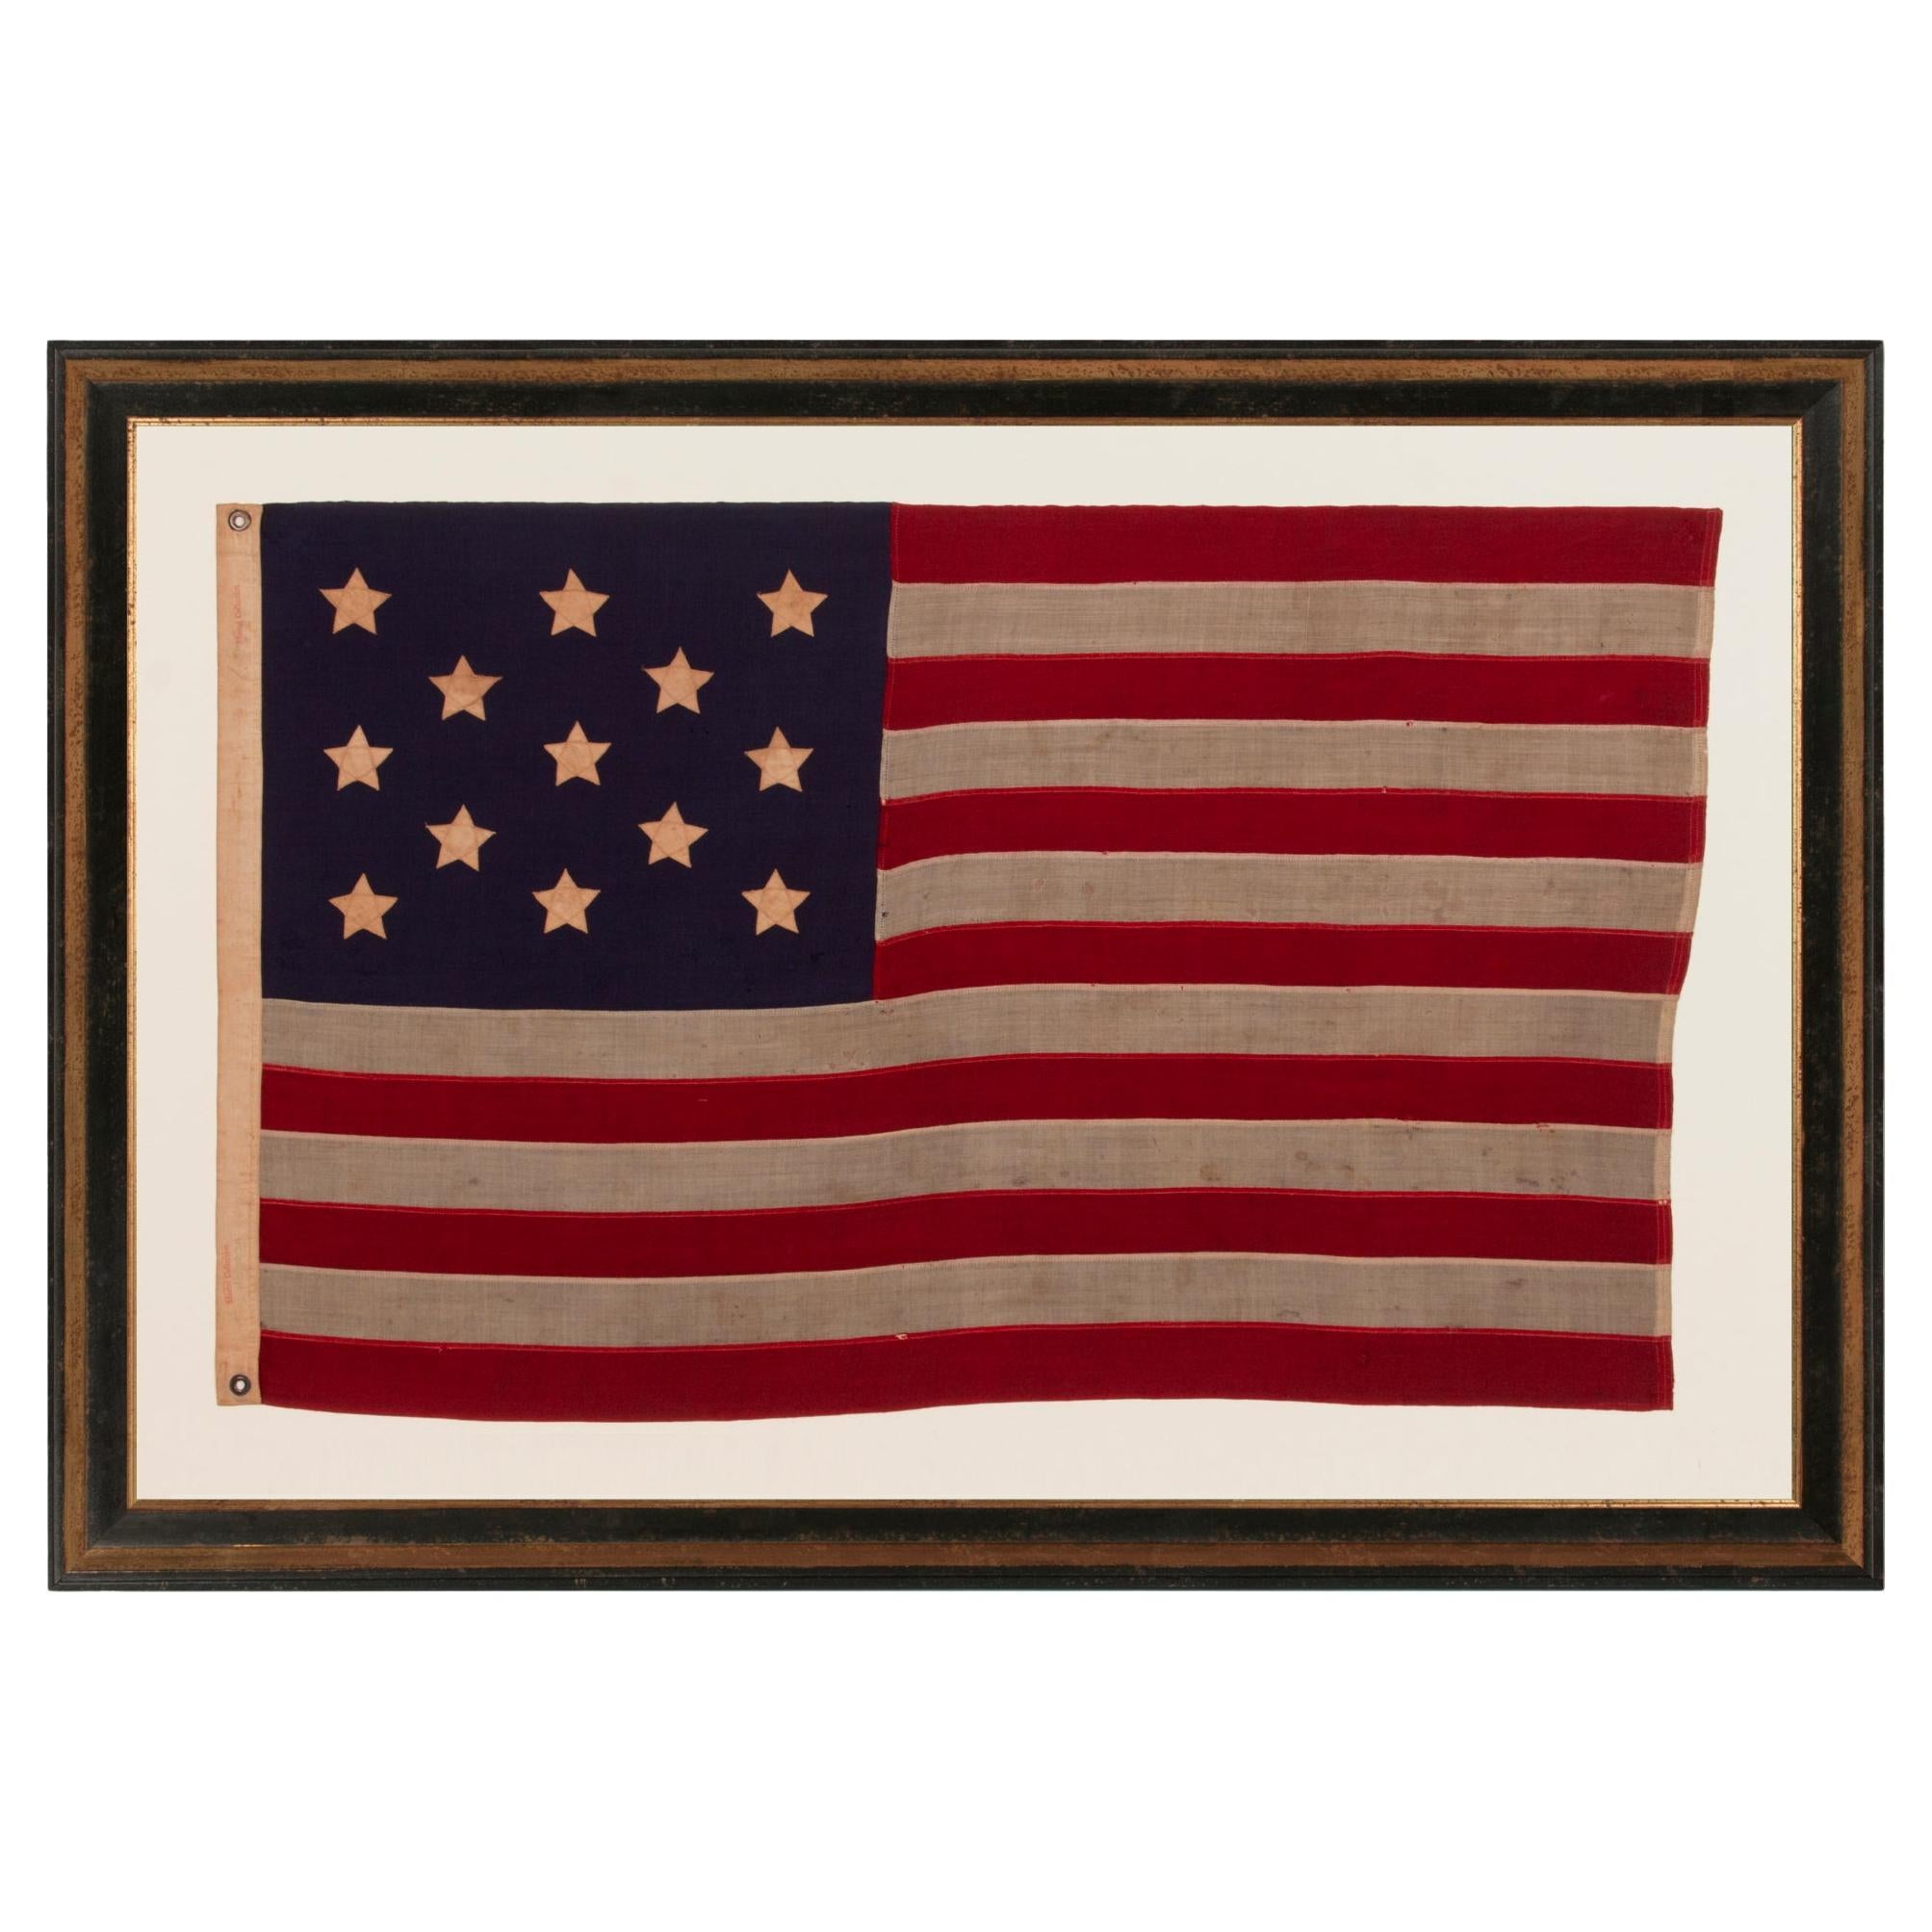 13 Star Antique American Flag , Ca 1890-1899 For Sale